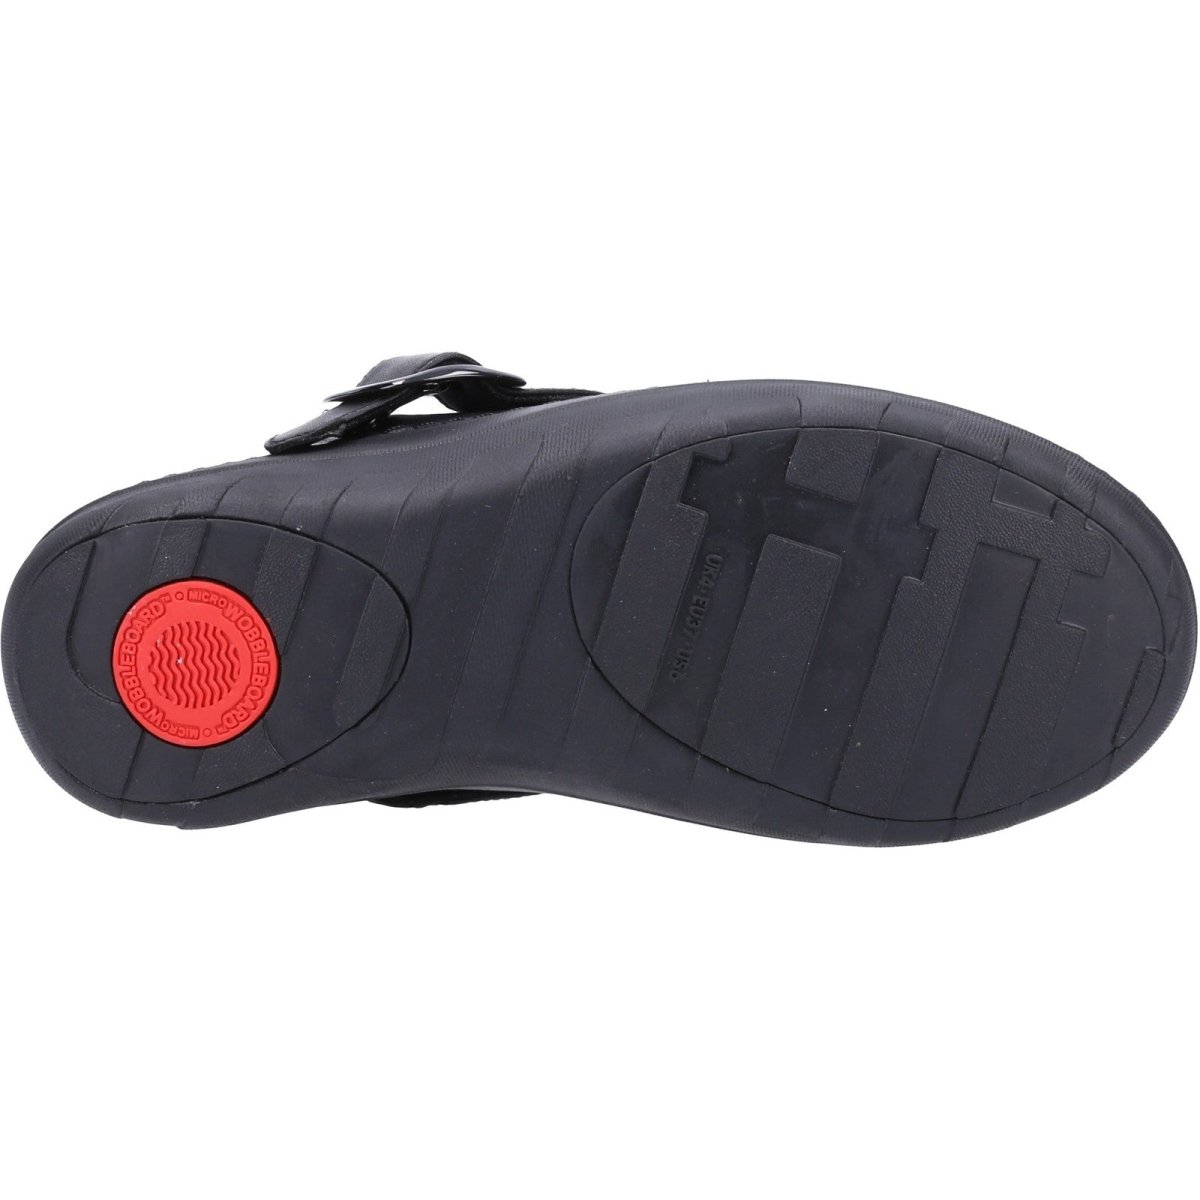 FitFlop Gogh Pro Ladies Superlight Clogs - Shoe Store Direct